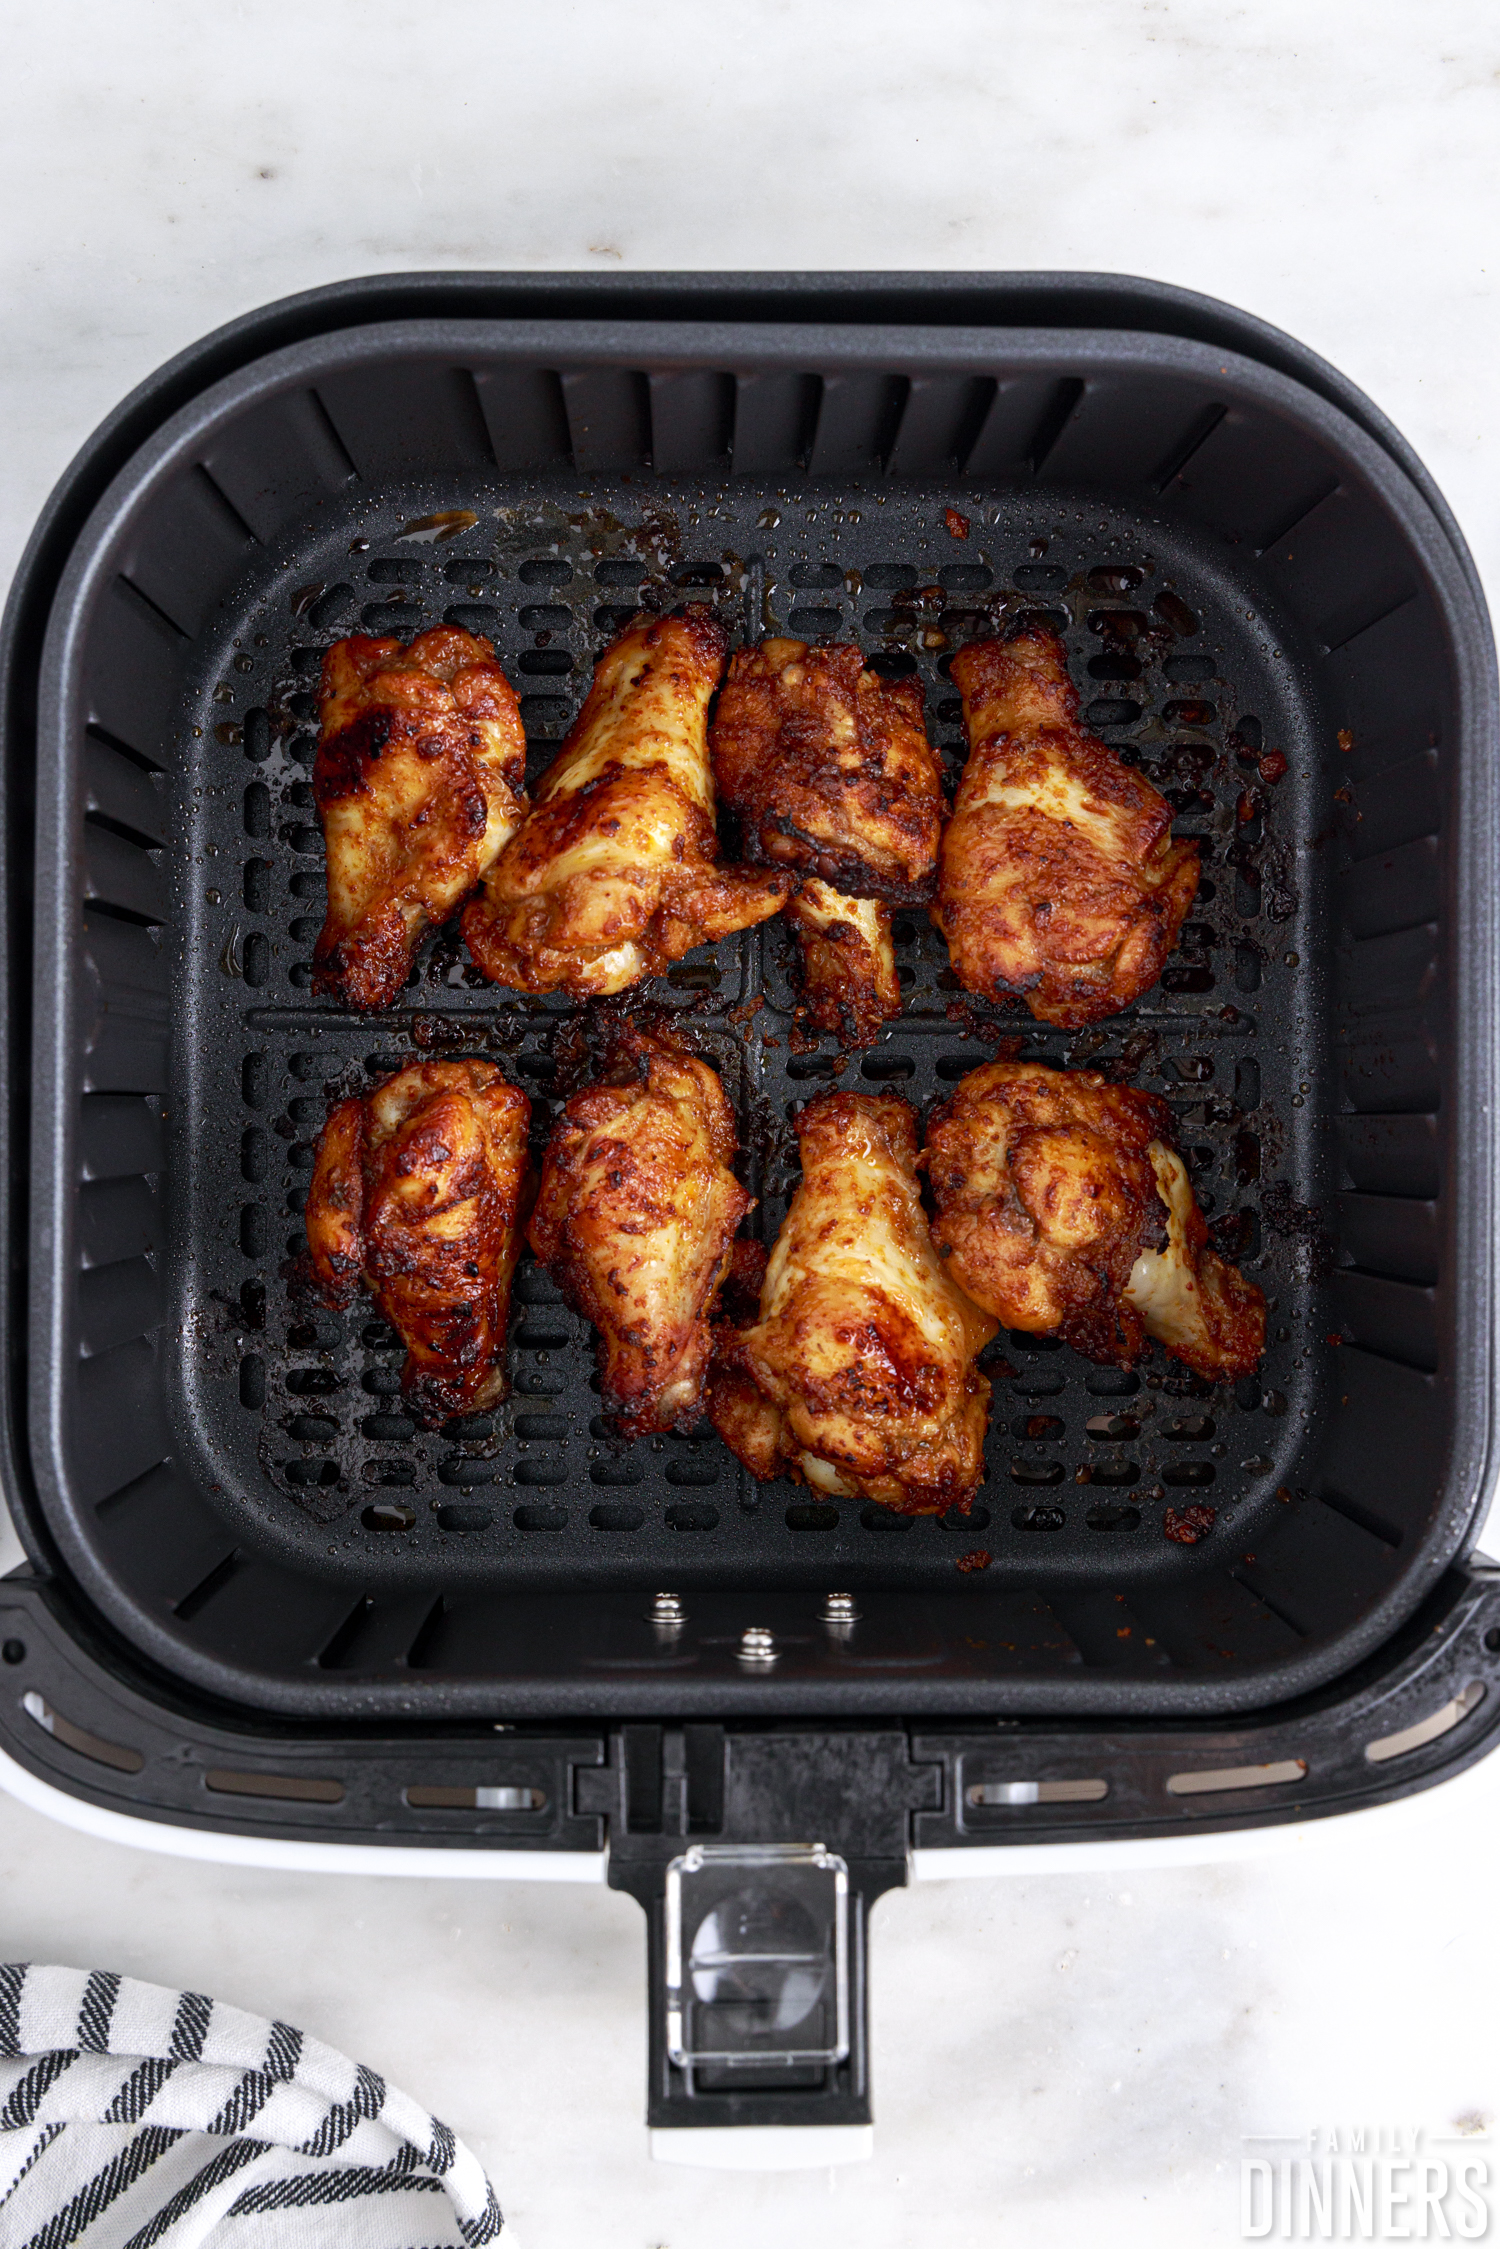 cooked chipotle chicken wings in air fryer